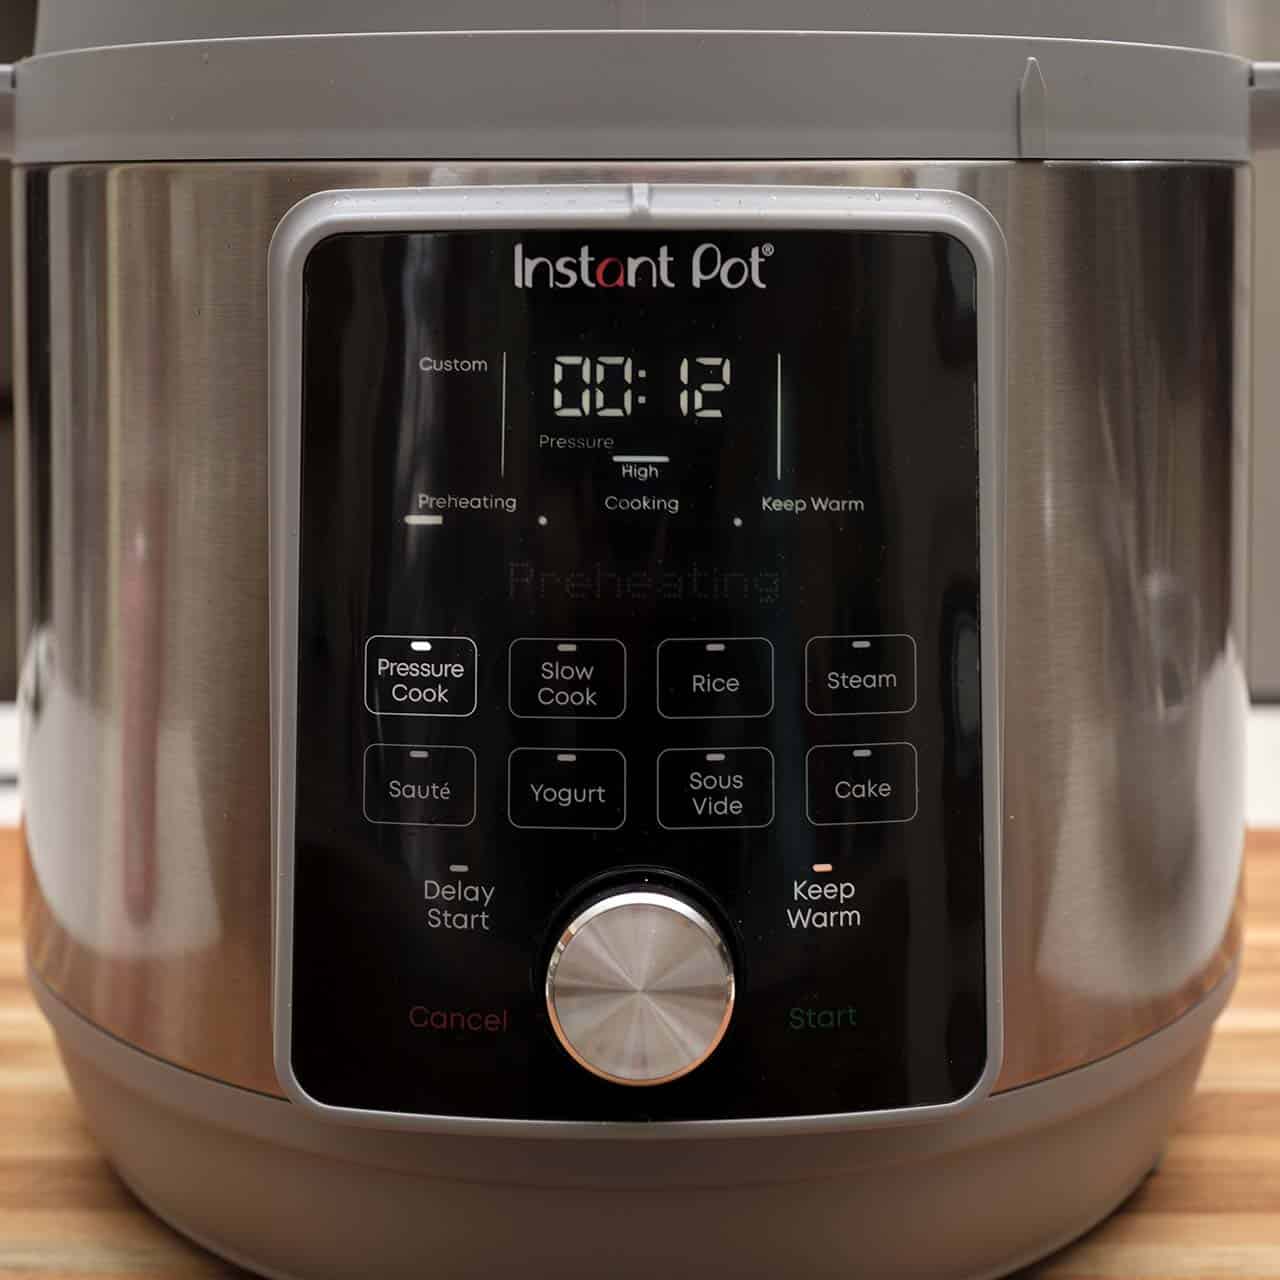 An Instant Pot set to pressure cook for 12 minutes